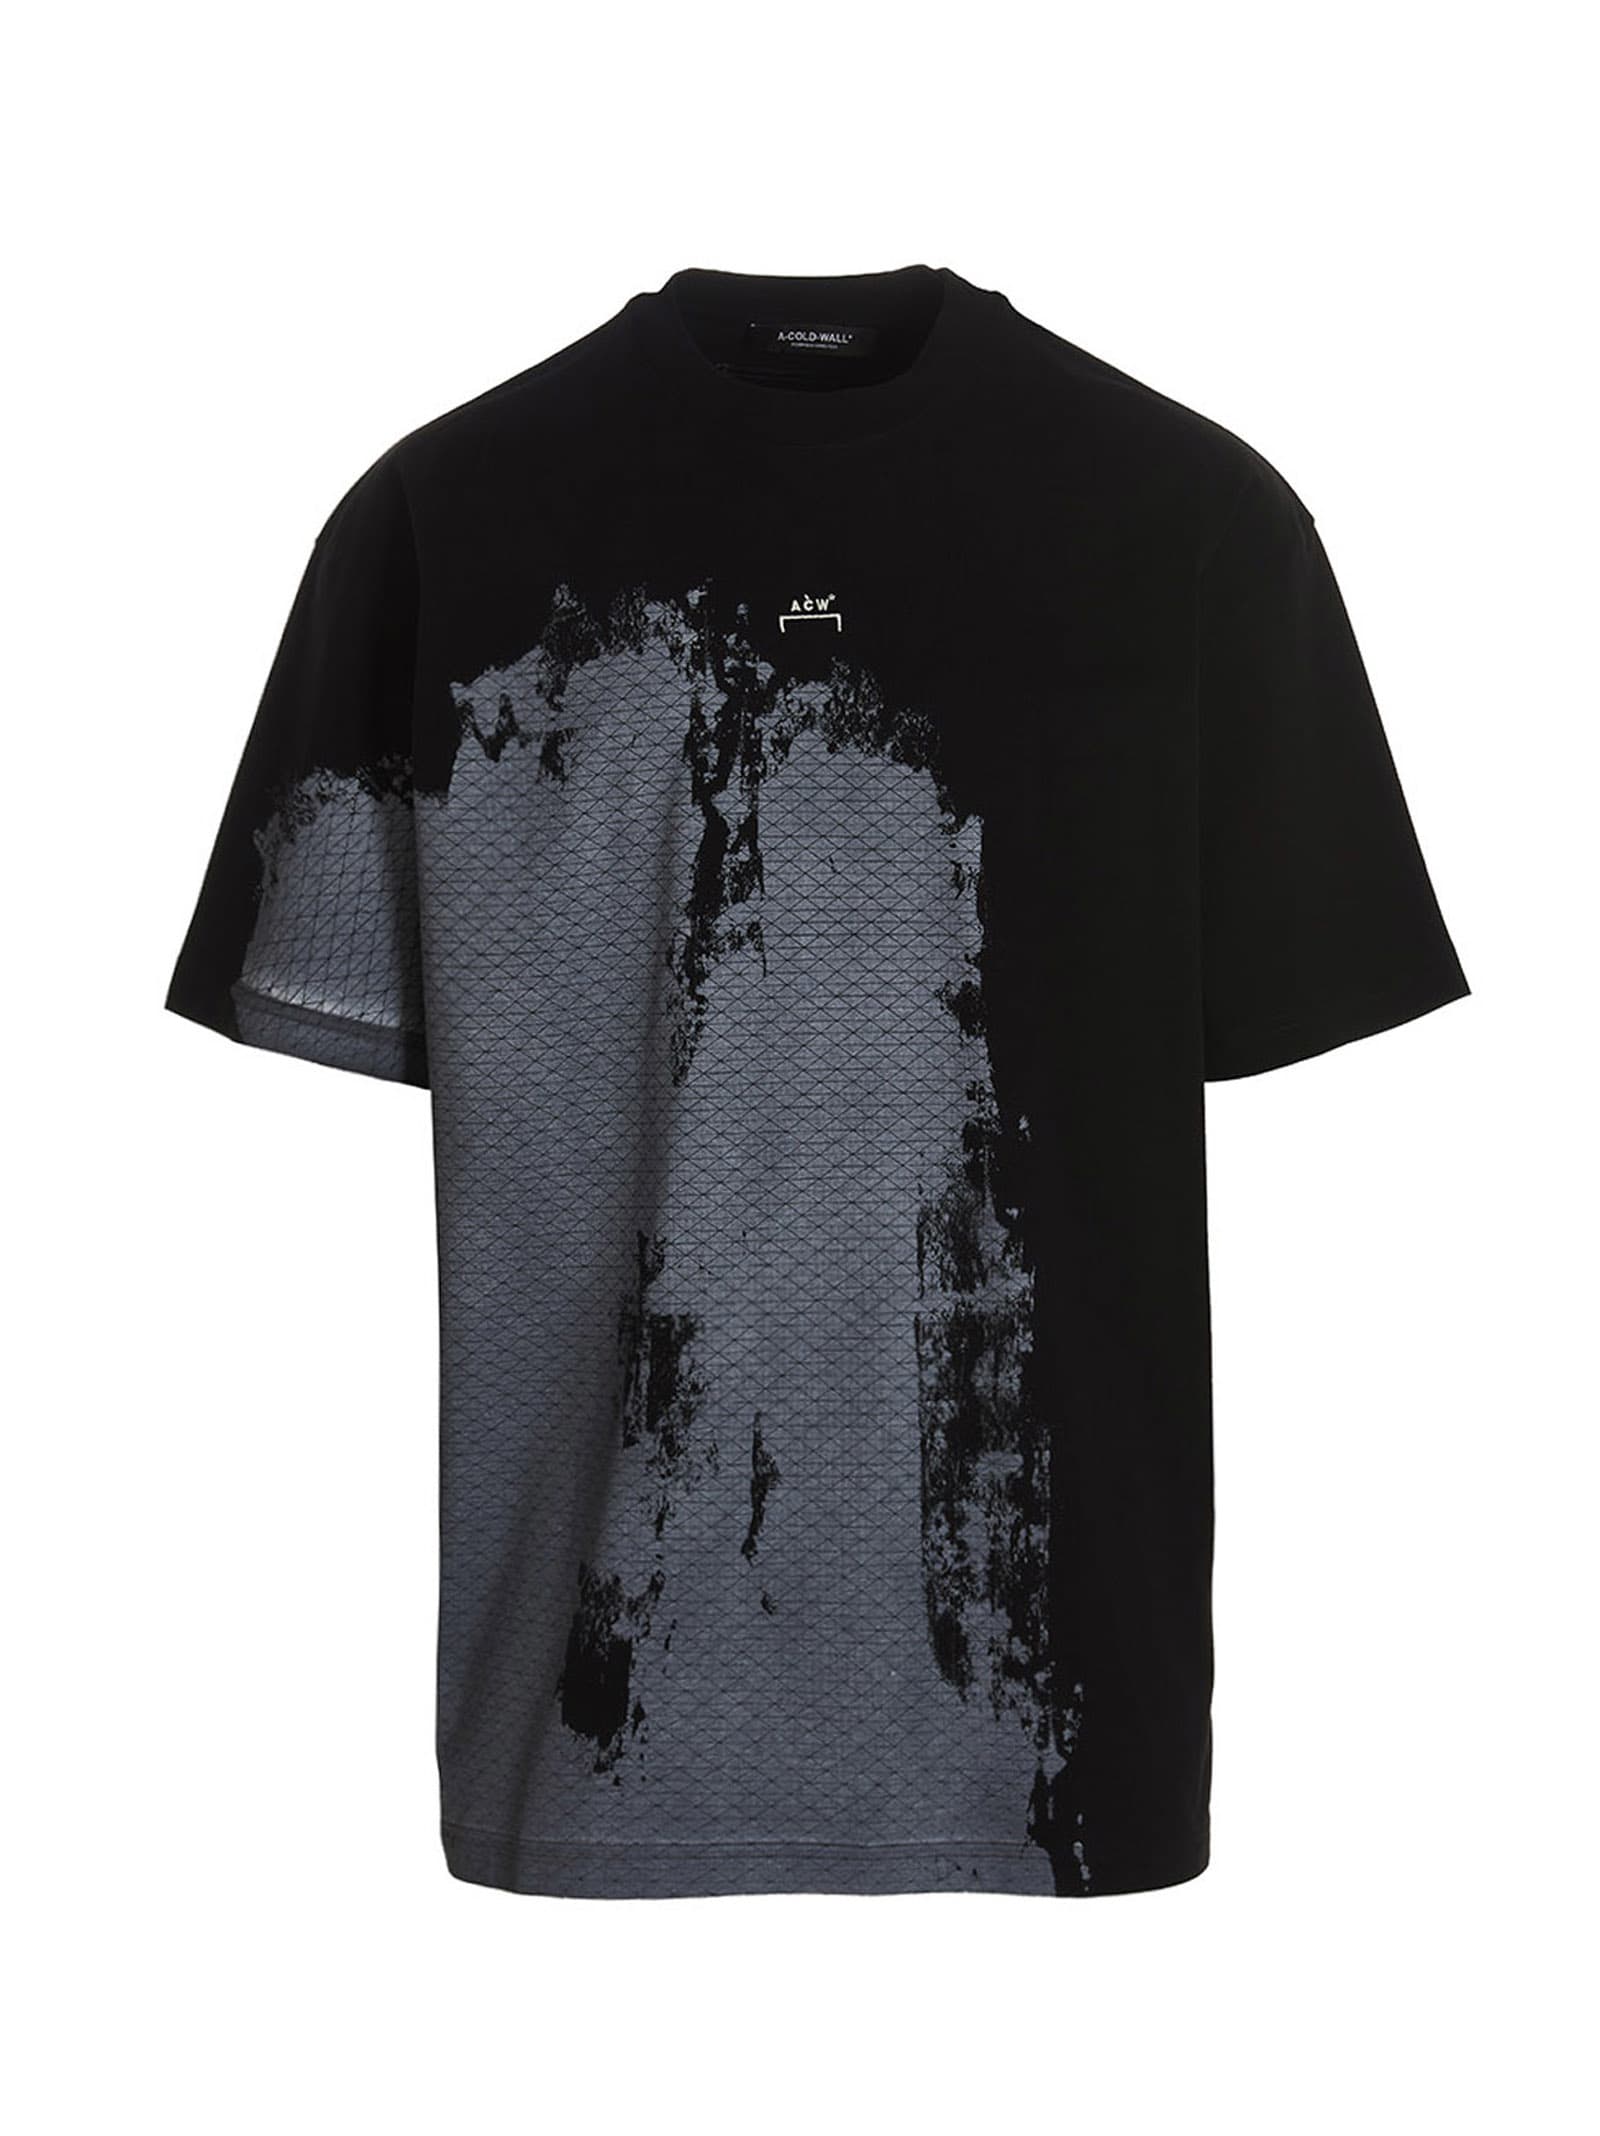 A-COLD-WALL brushstroke T-shirt